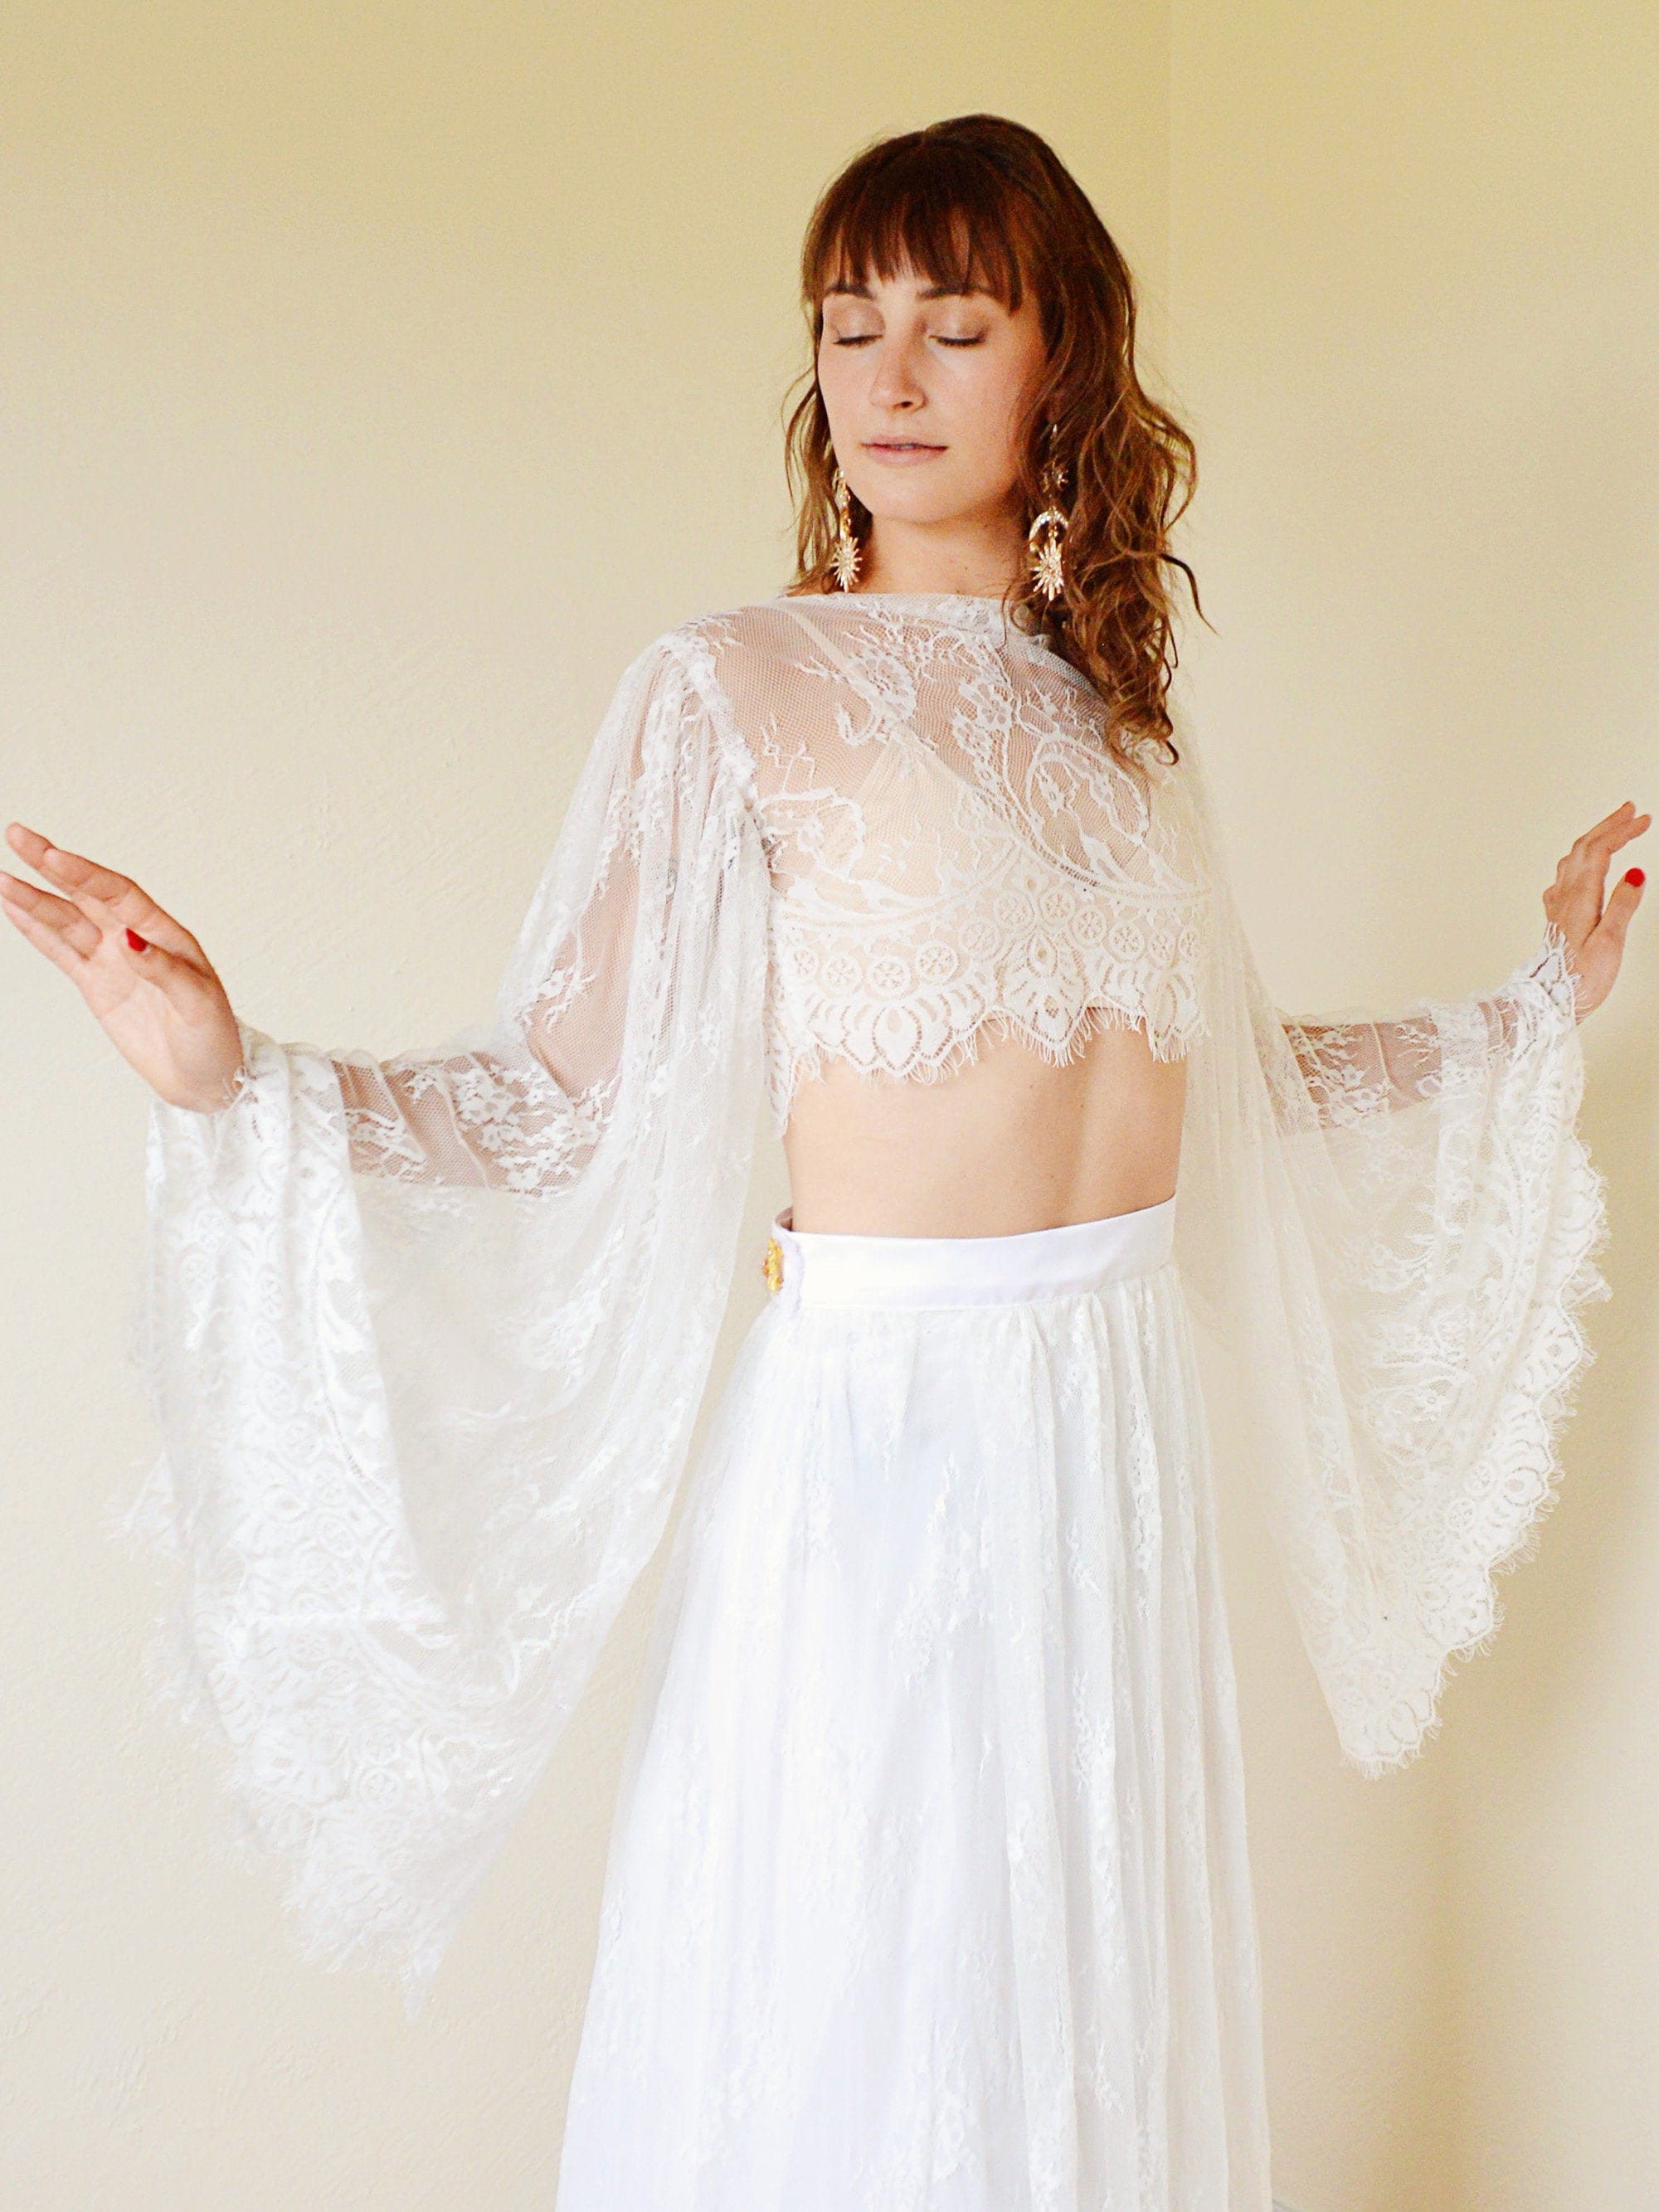 Lace Bell Sleeve Top, Chantilly Lace Bridal Coverup, Angel Wing Blouse,  Black or White Eyelash Wedding Midriff Crop Top, Sheer Long Sleeve -   Canada